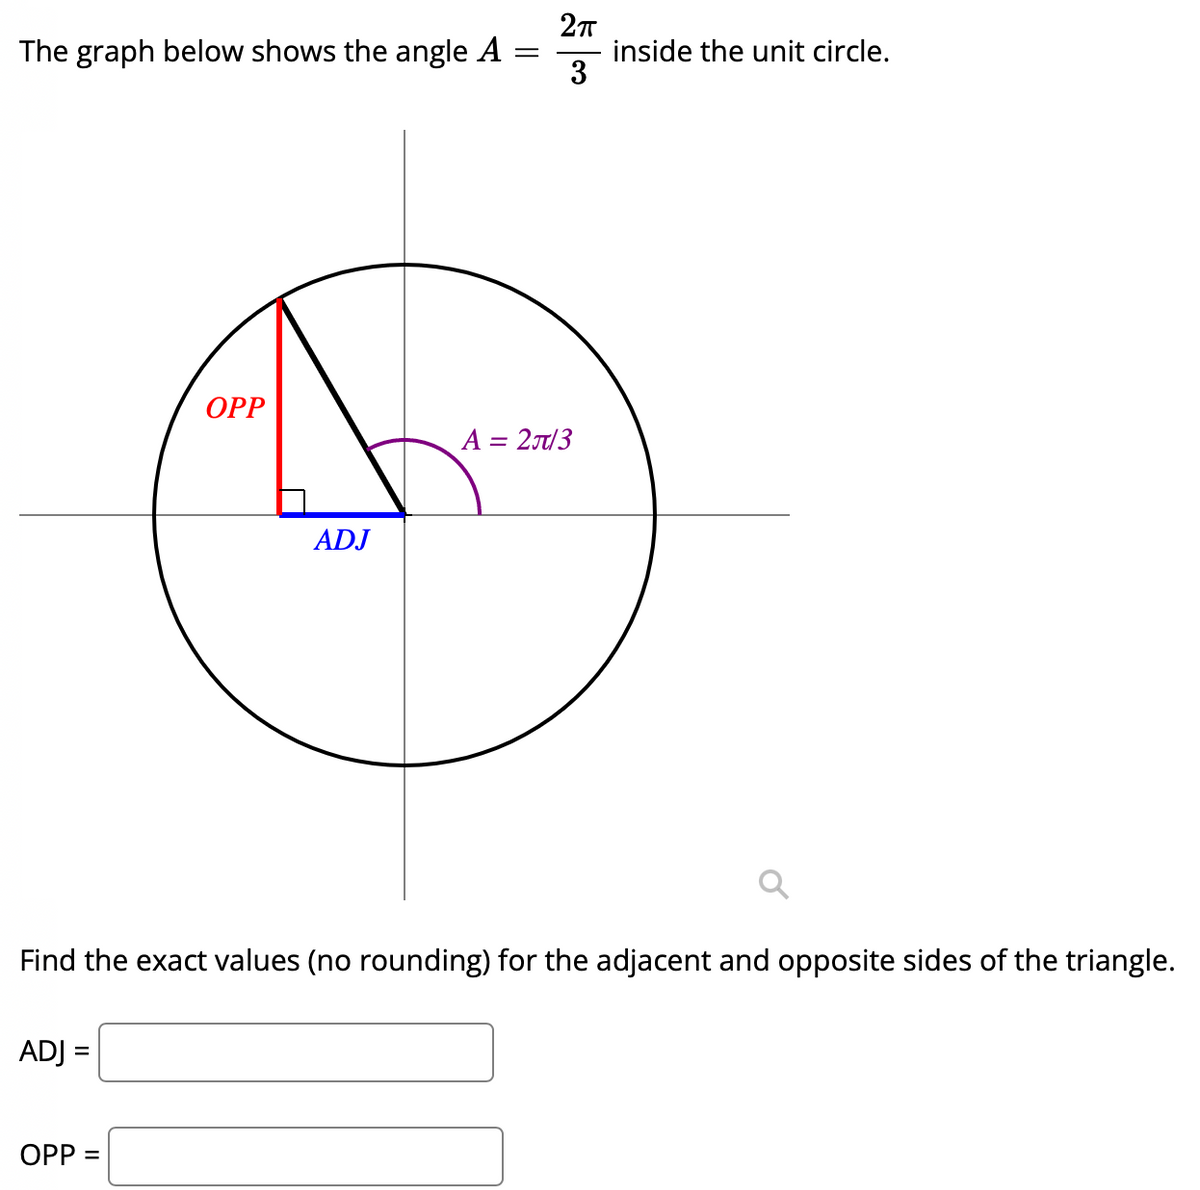 The graph below shows the angle A
ADJ =
OPP
OPP =
ADJ
=
2π
3
A = 2π/3
Find the exact values (no rounding) for the adjacent and opposite sides of the triangle.
inside the unit circle.